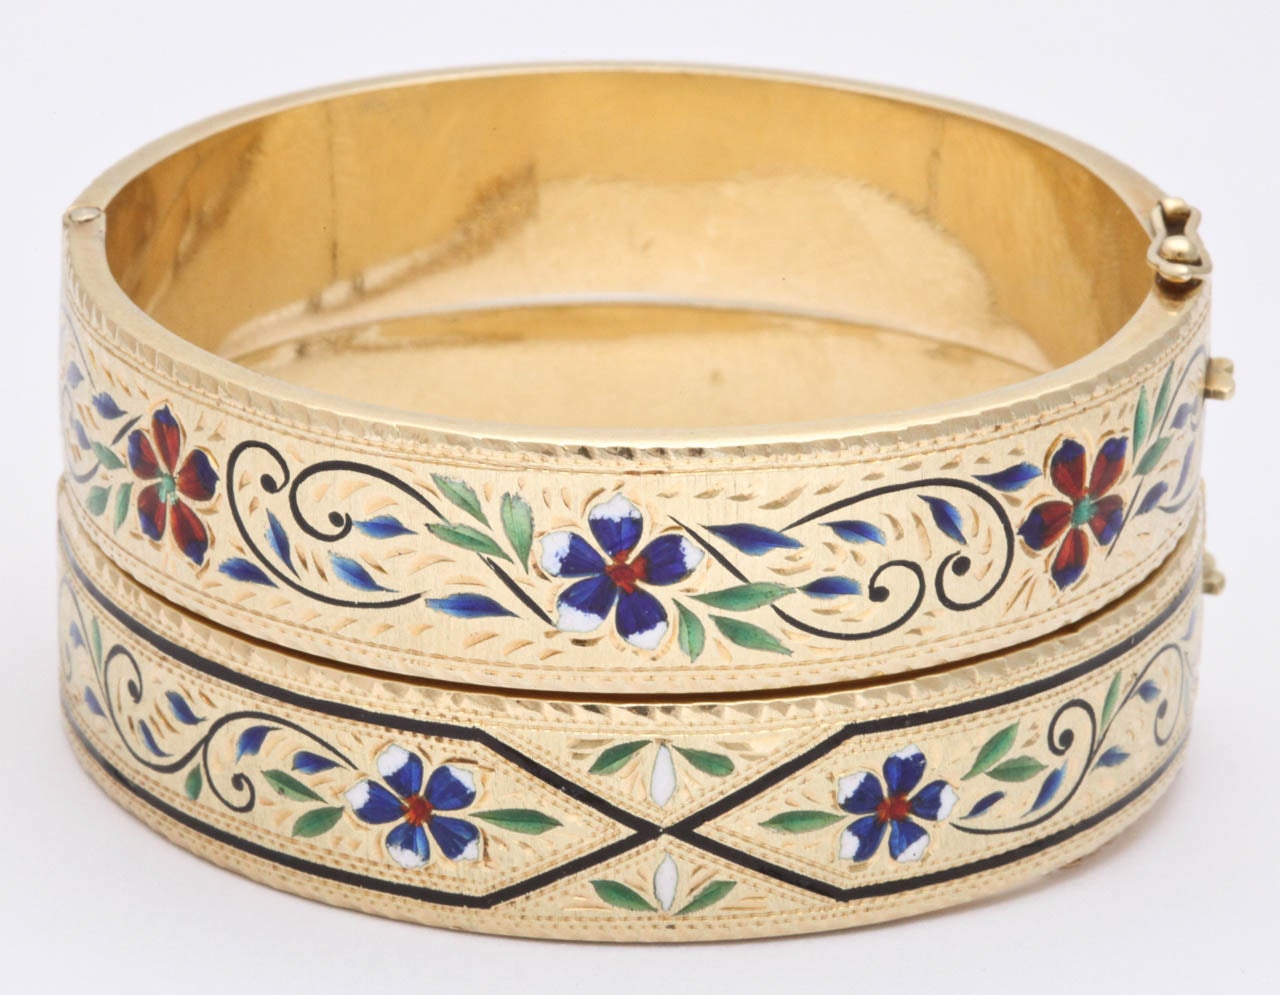 14kt yellow gold and multicolored enamel bangle bracelets with gorgeous enamel workmanship and design pair of cuff bangle bracelets circa 1920,s american made